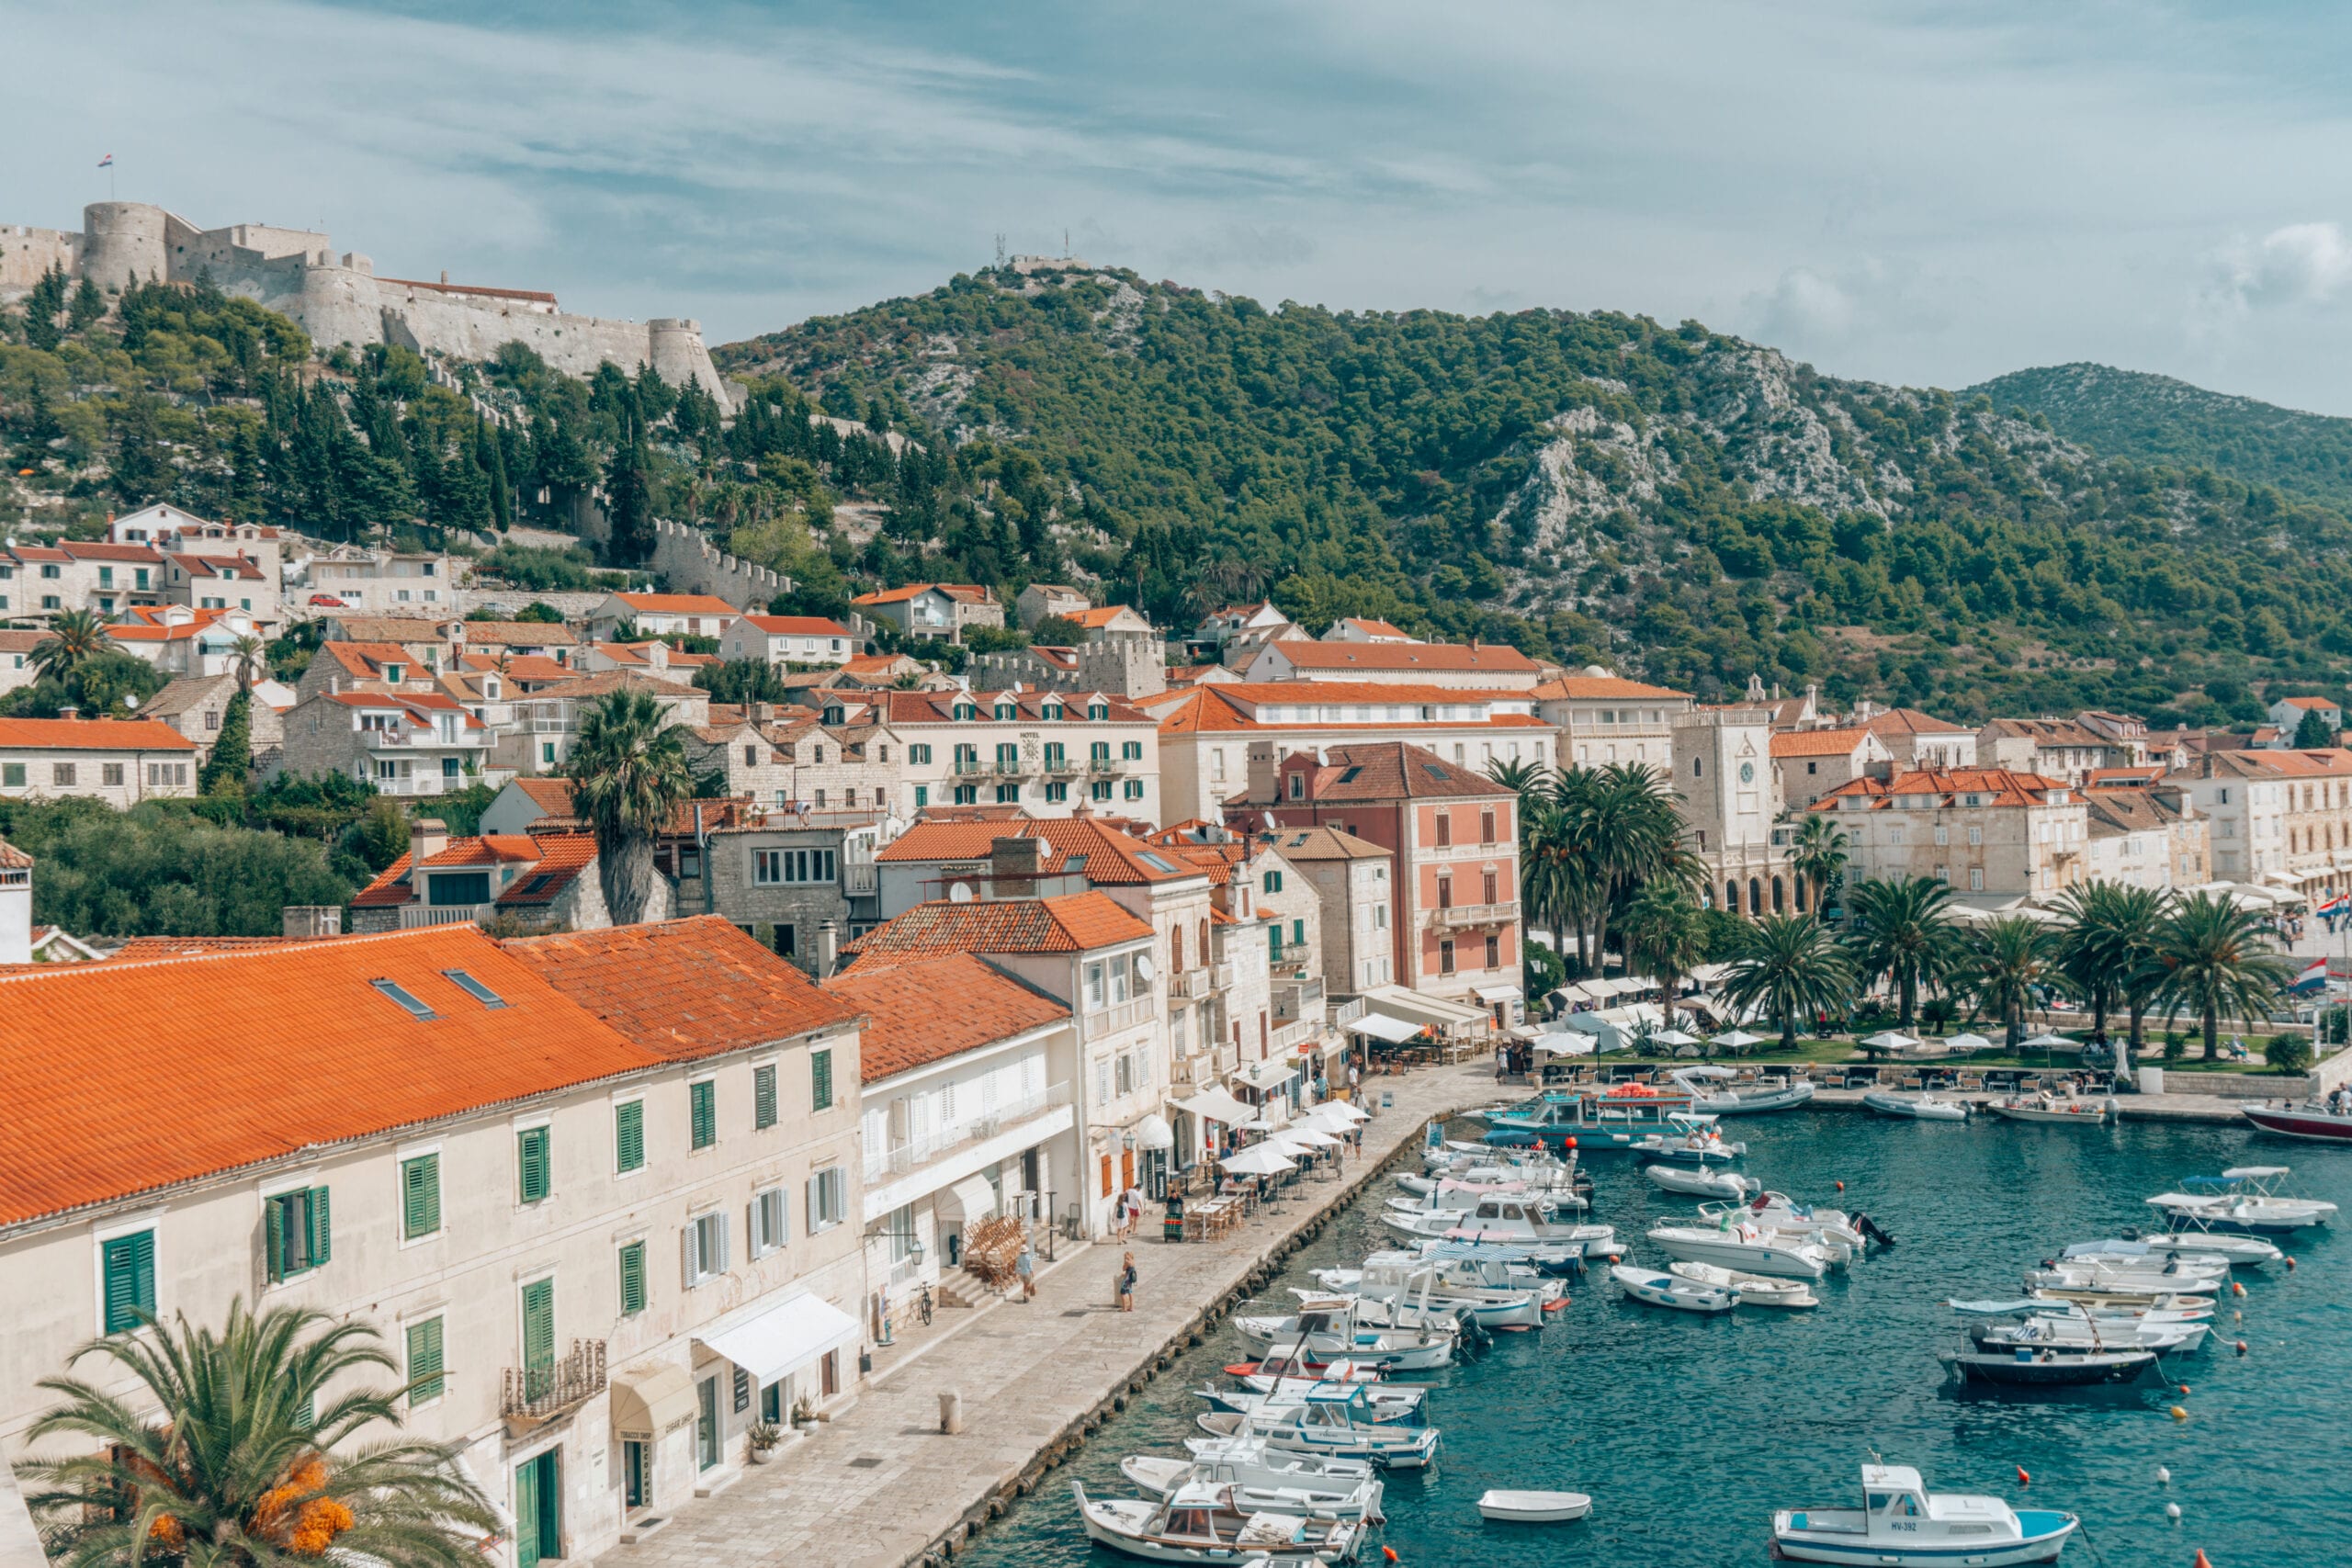 Hvar in Croatia, one of the most romantic places in Europe